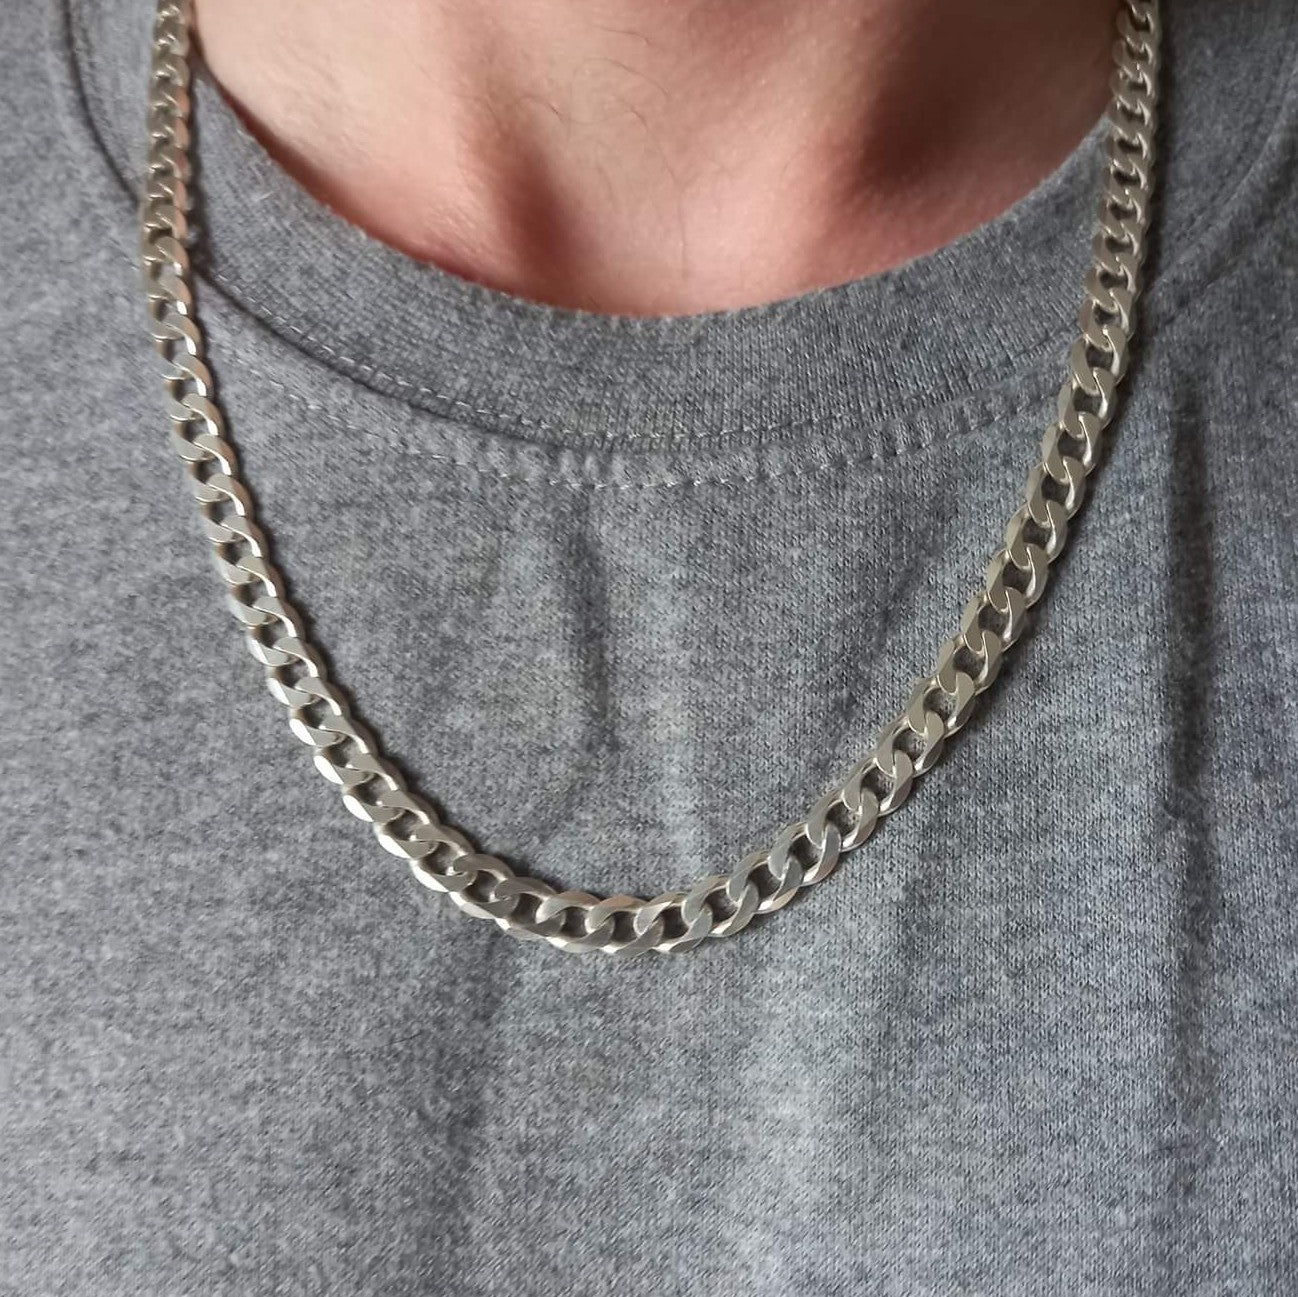 Man wearing a sterling silver curb chain